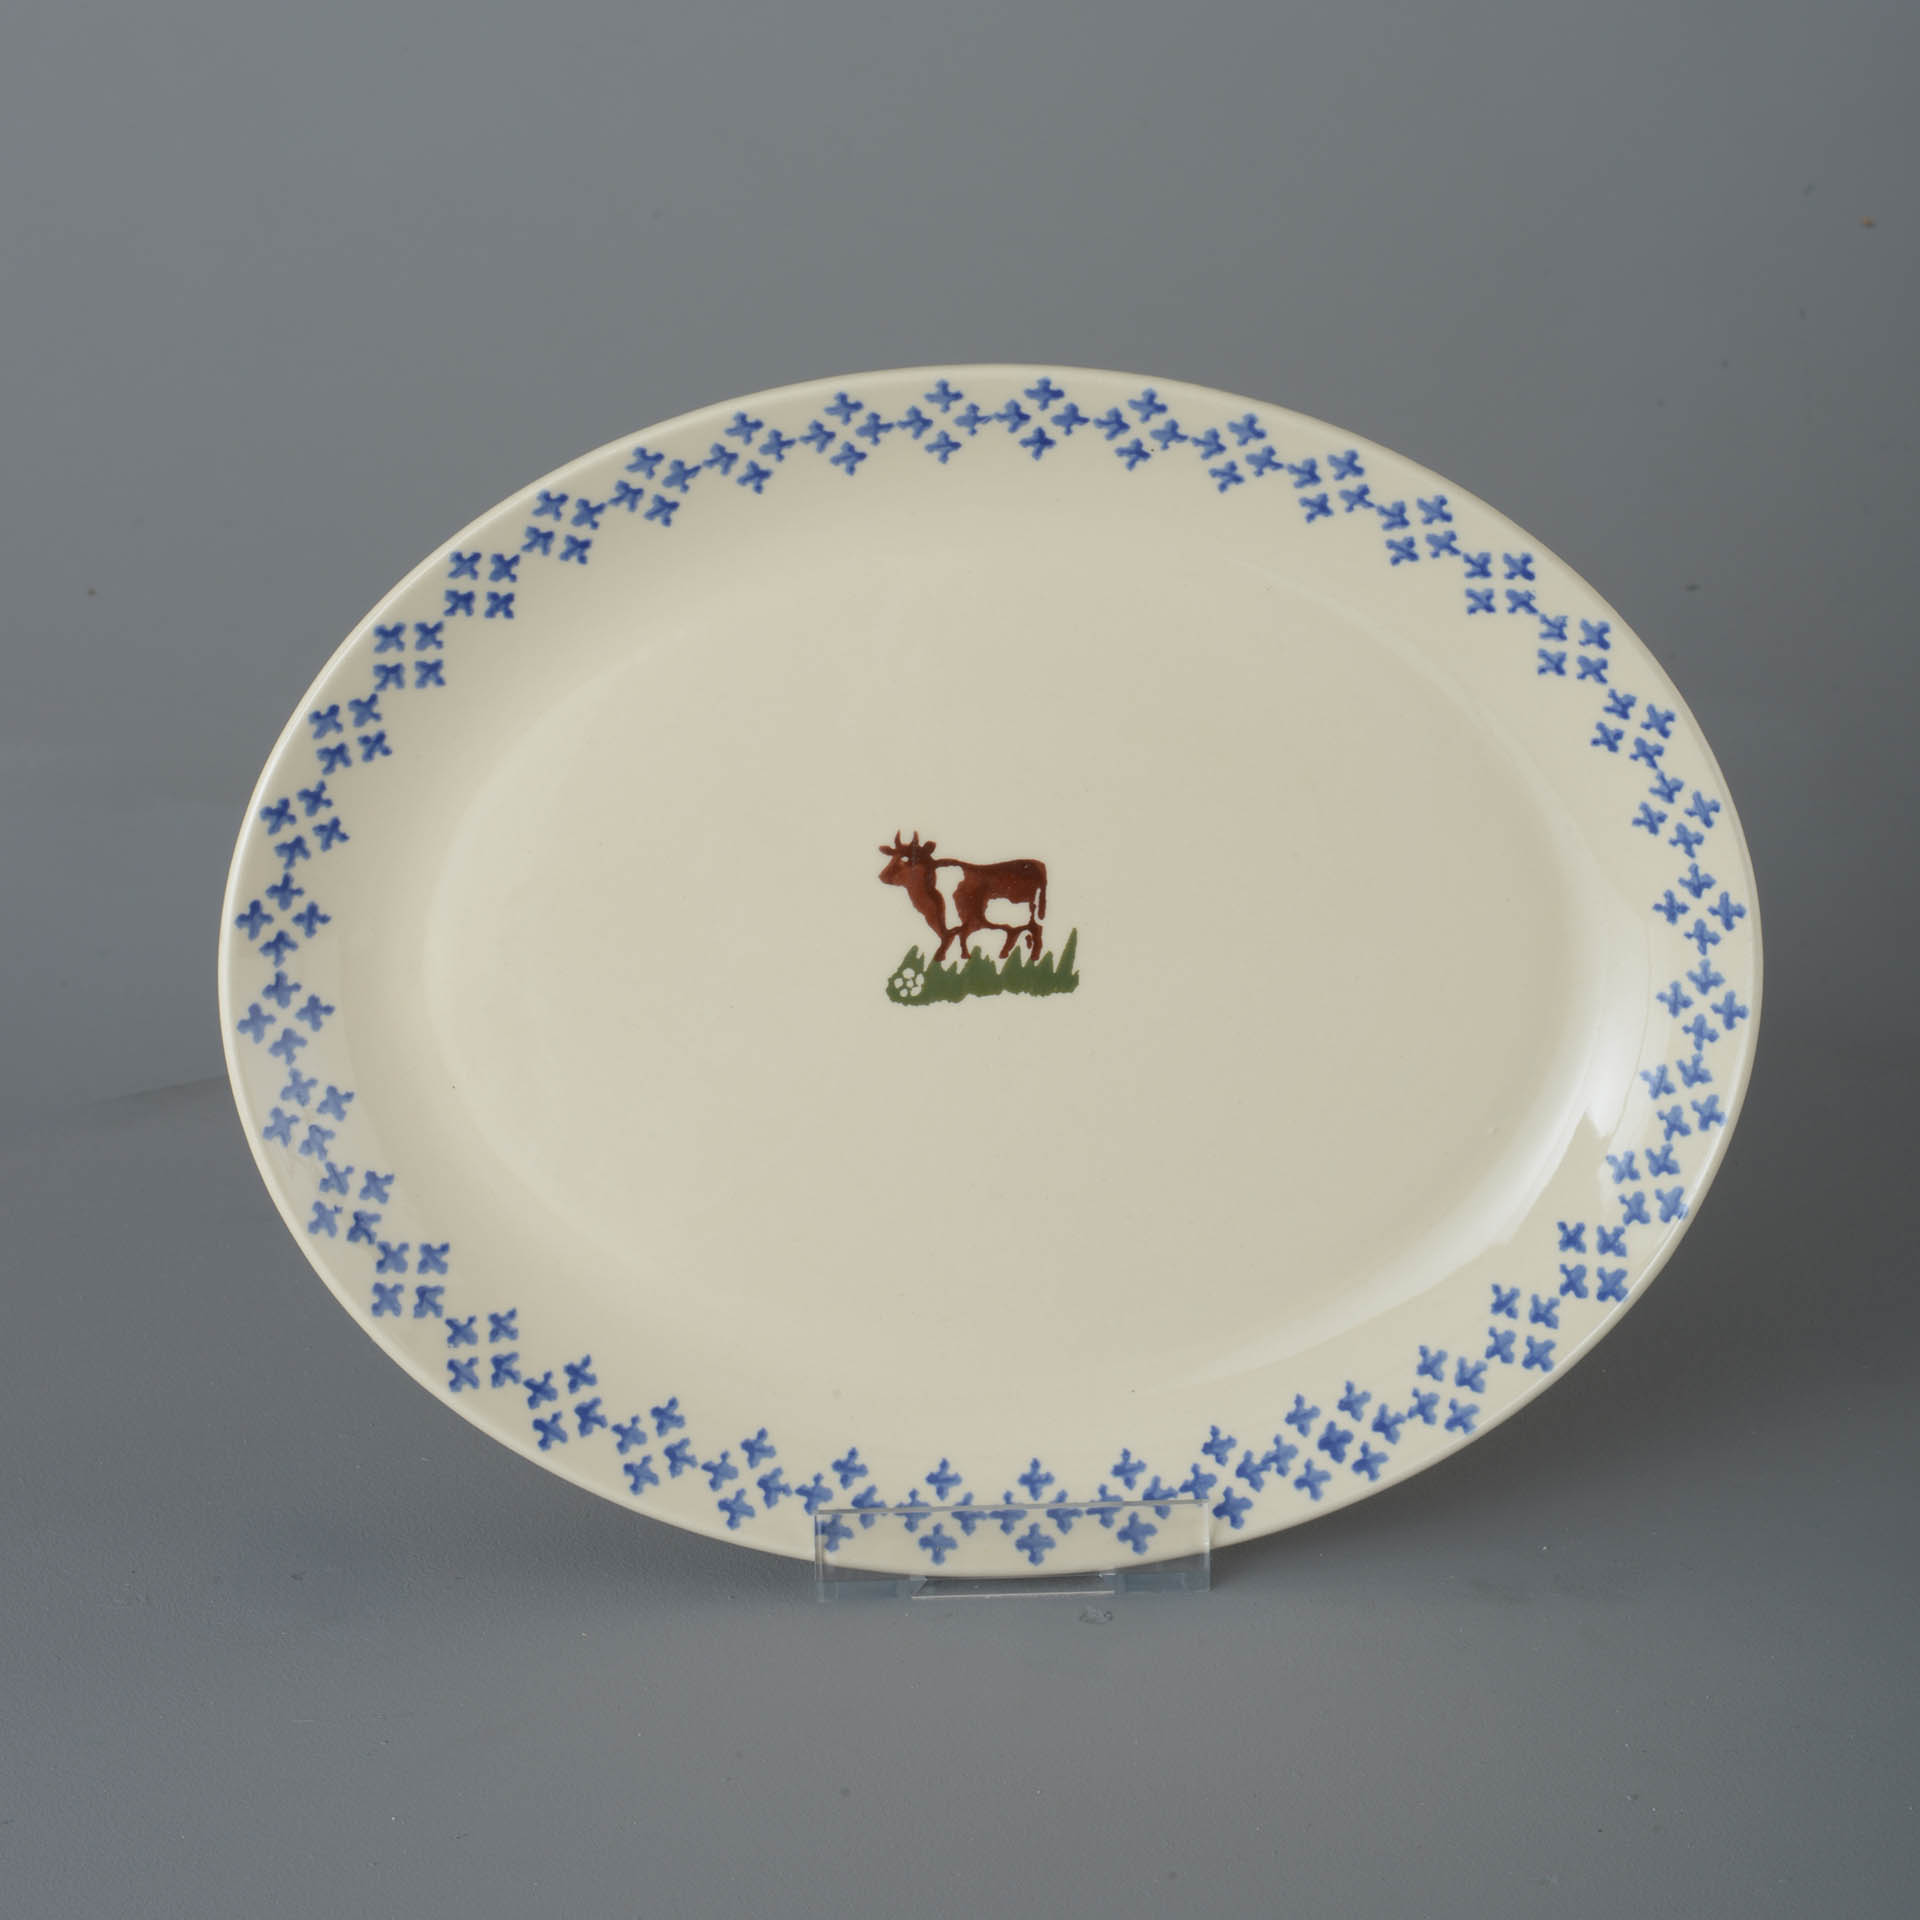 Brixton Cows Oval Plate 23.5cm X 29cm Gift